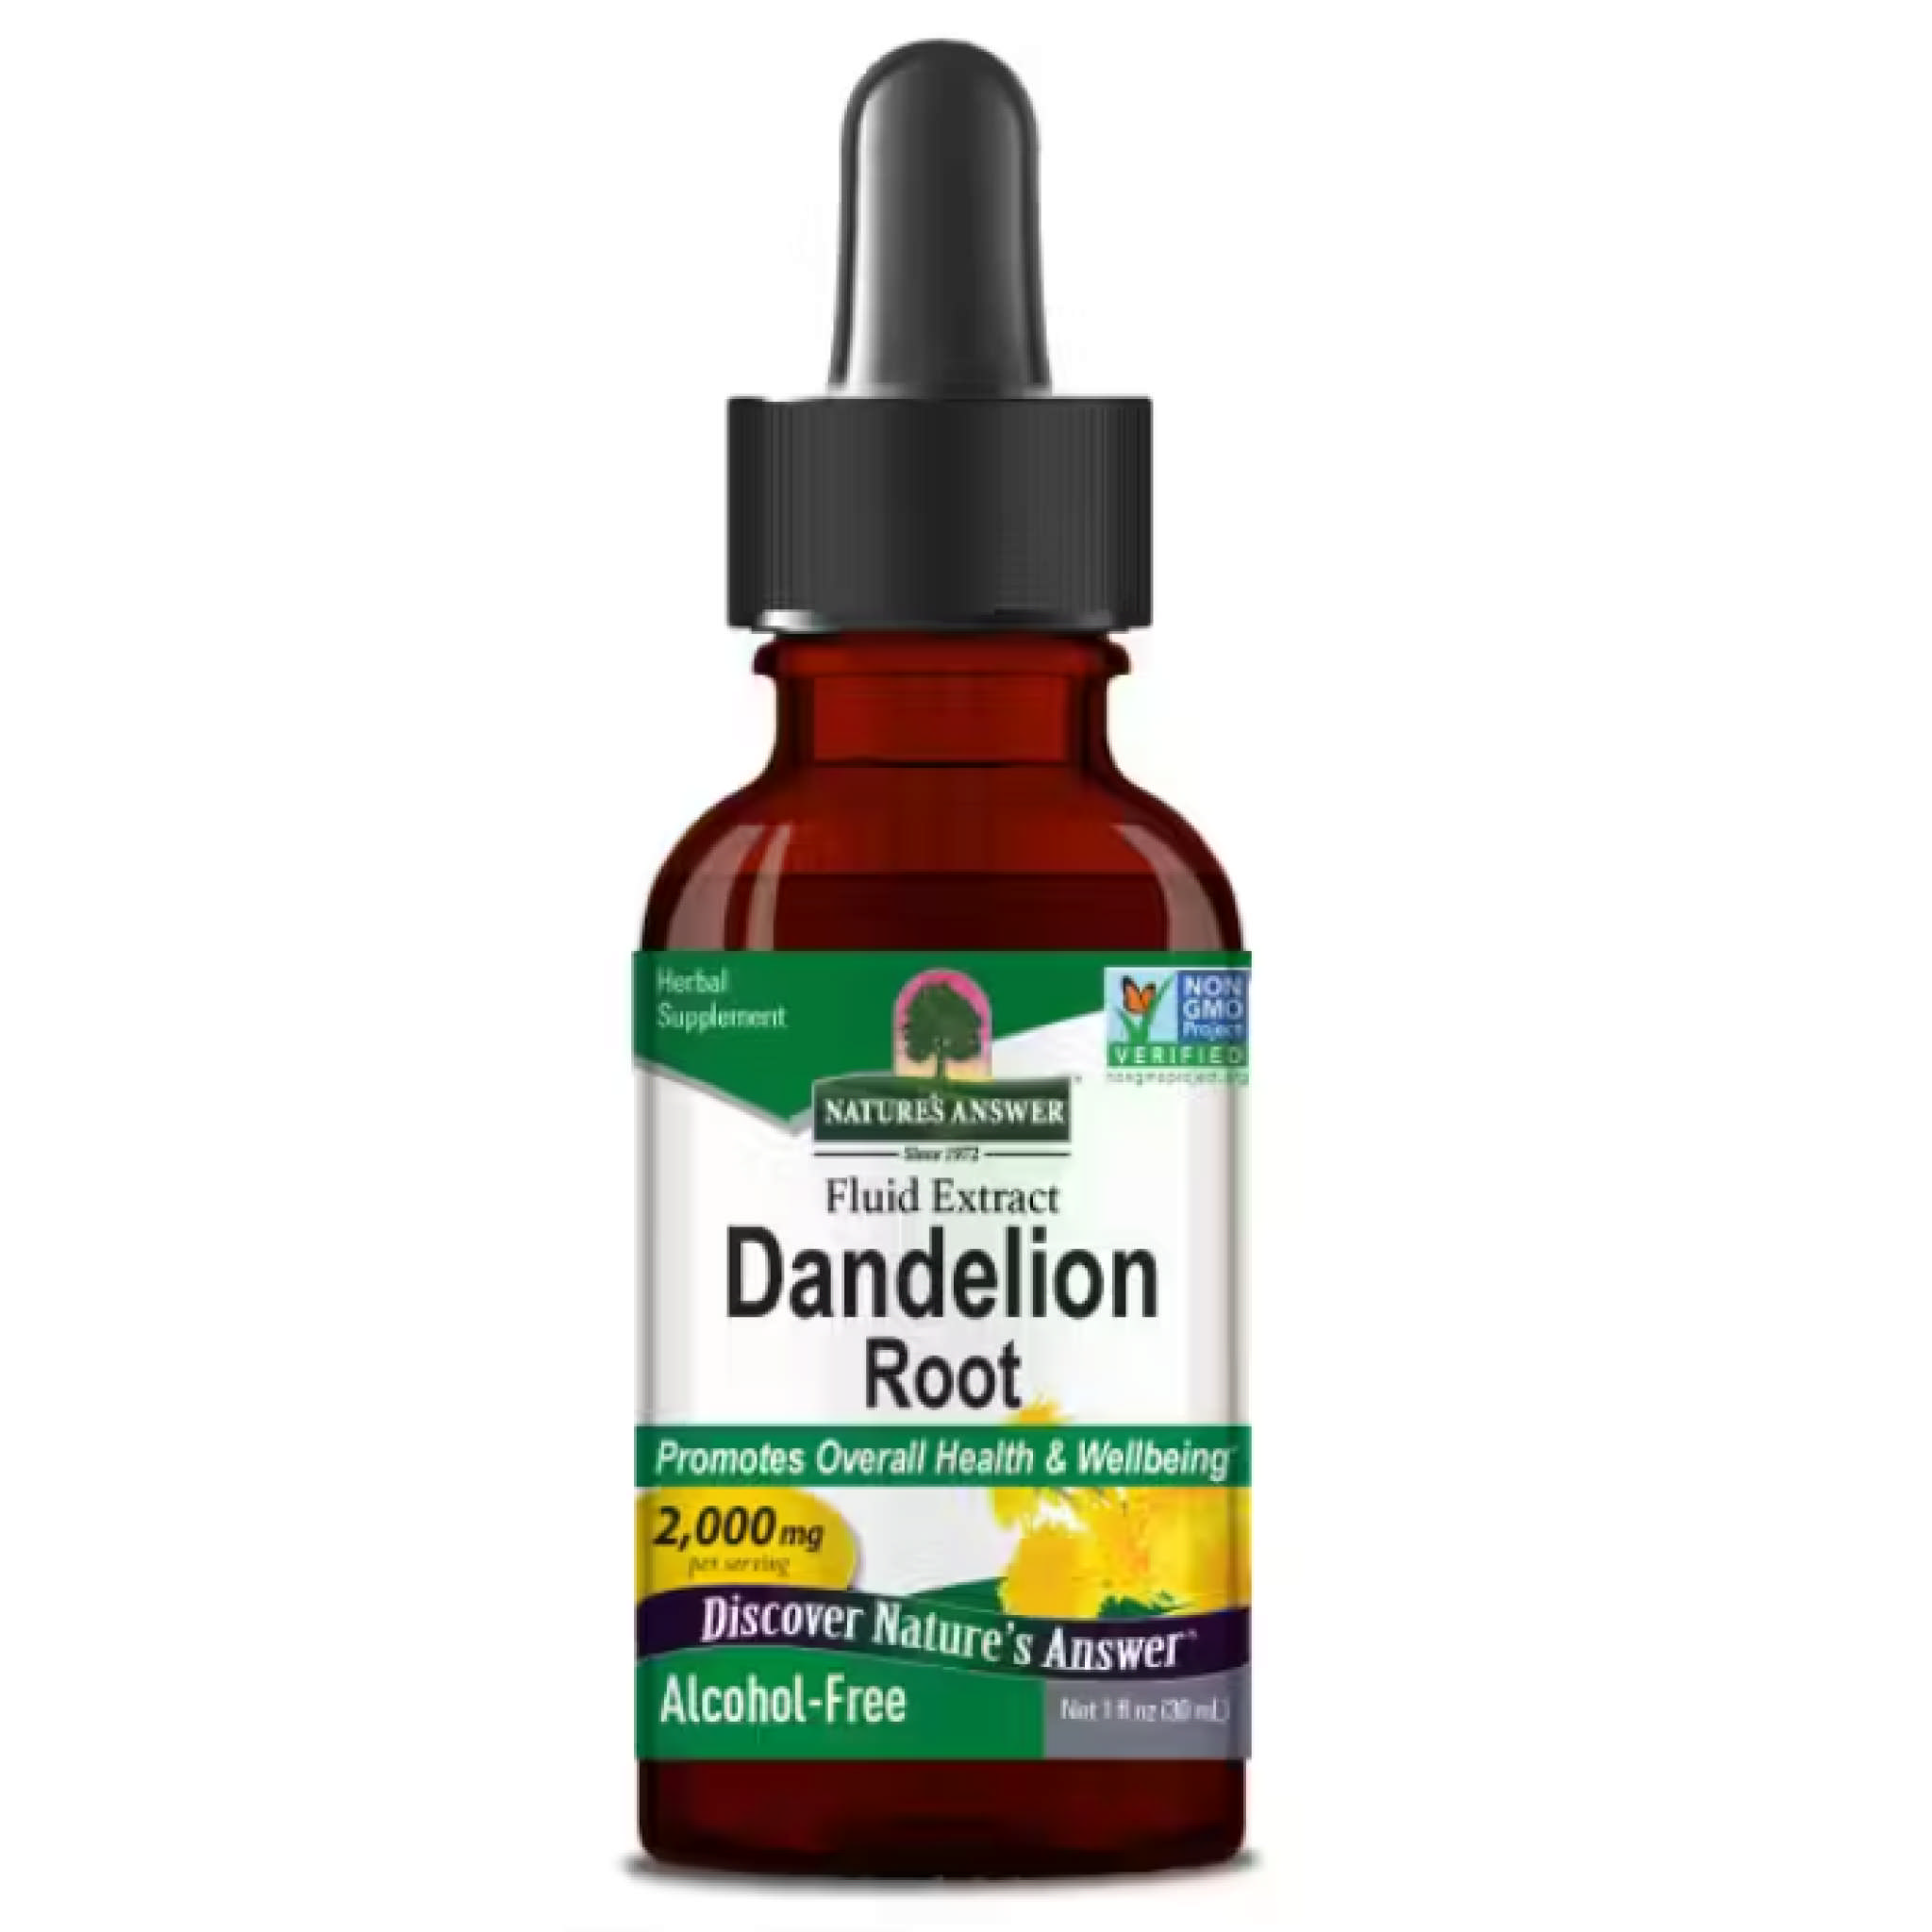 Natures Answer - Dandelion Root A/F